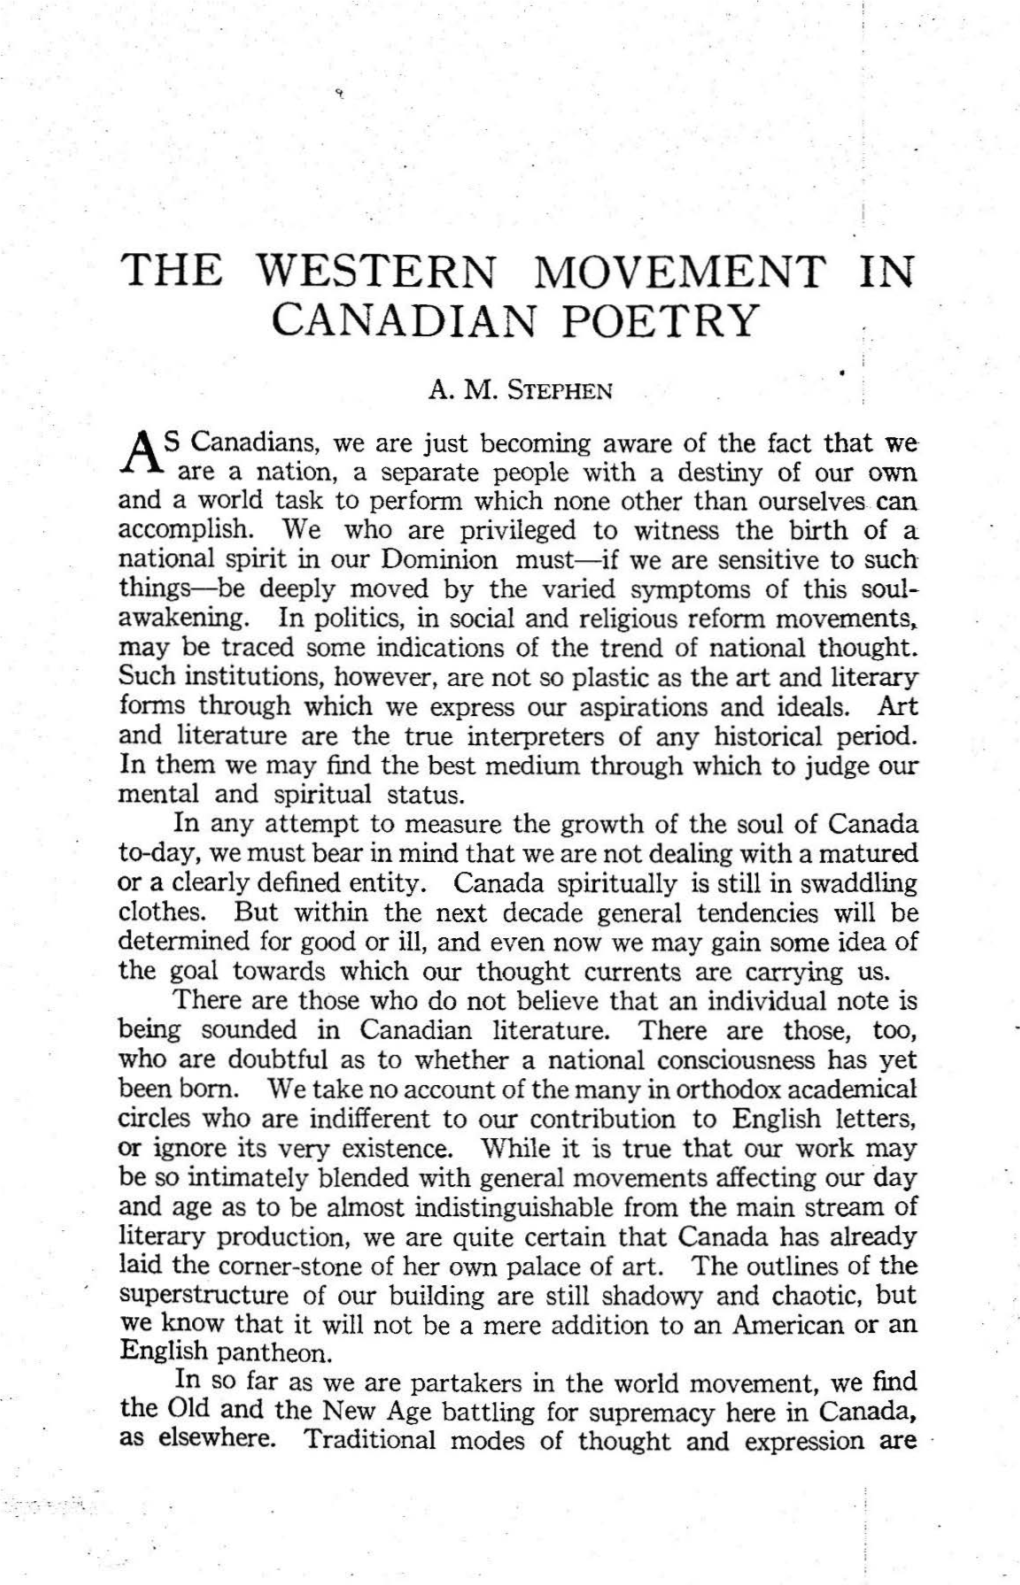 The Western Movement in Canadian Poetry